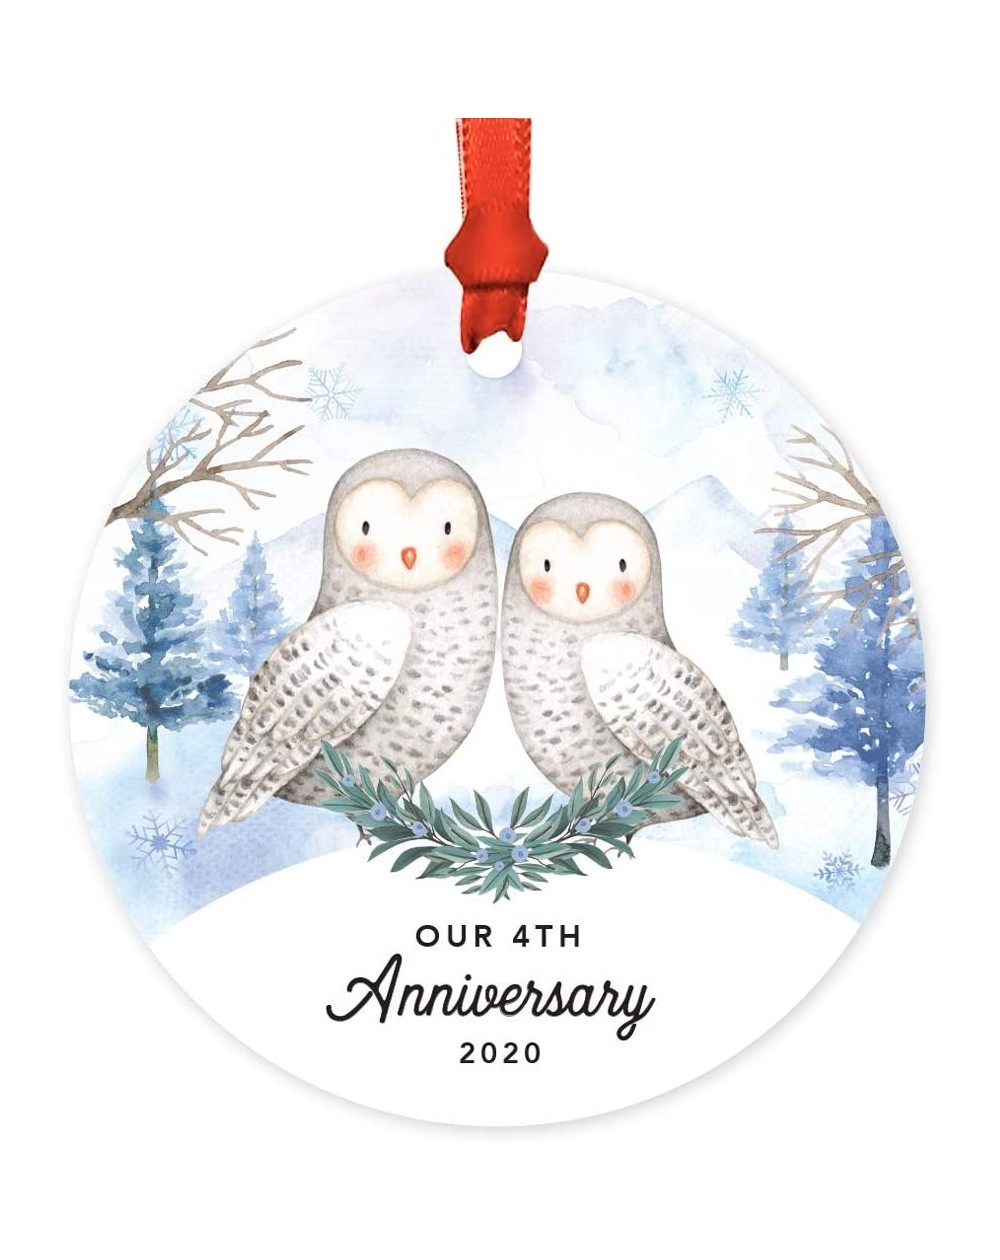 Ornaments Round Christmas Keepsake Ornament- Our 4th Anniversary 2020- Watercolor Winter Snow Owls- 1-Pack- Includes Ribbon a...